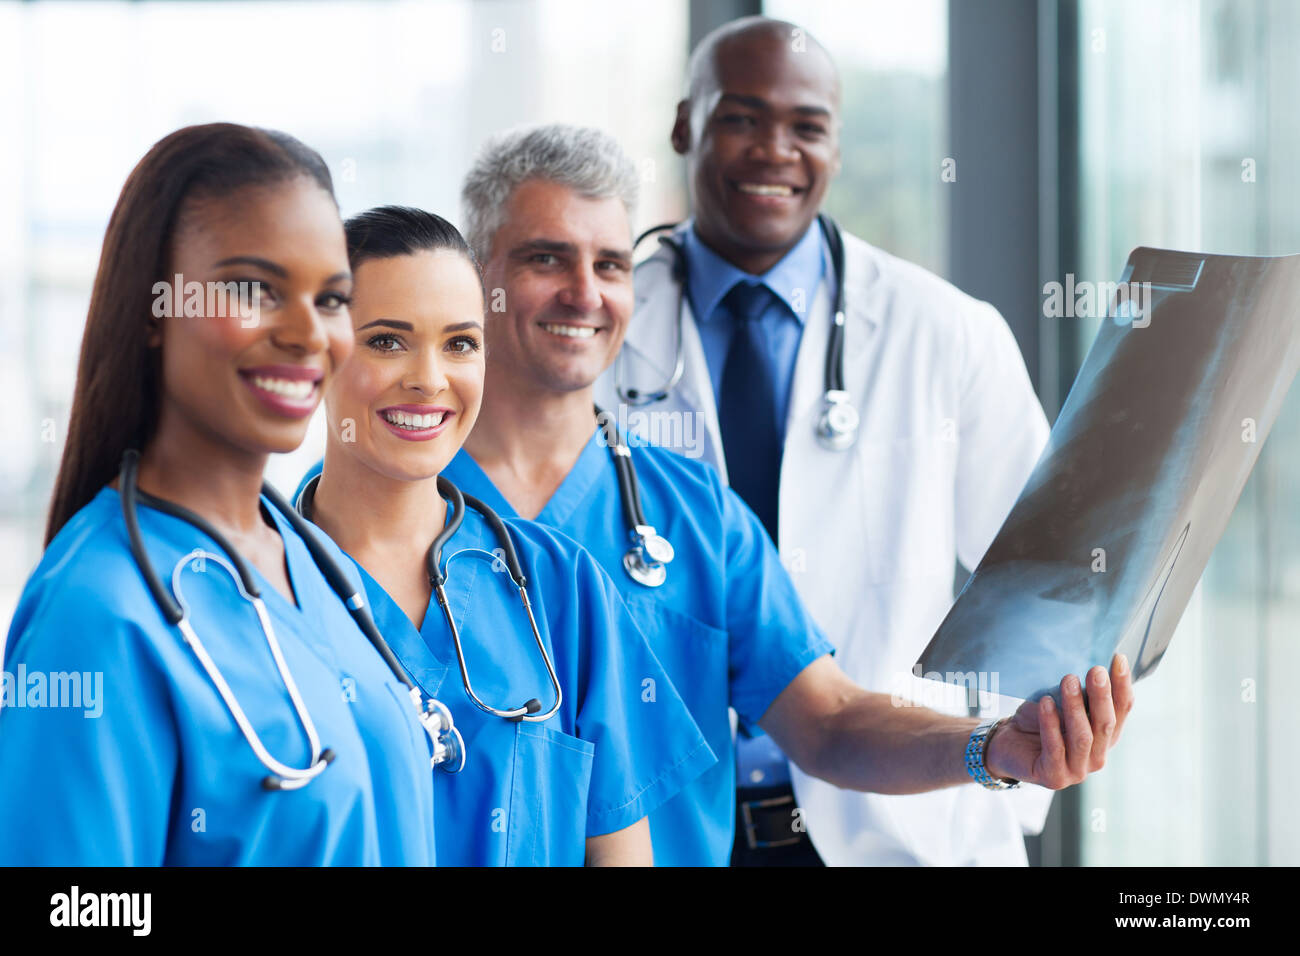 group of professionals medical workers working together Stock Photo